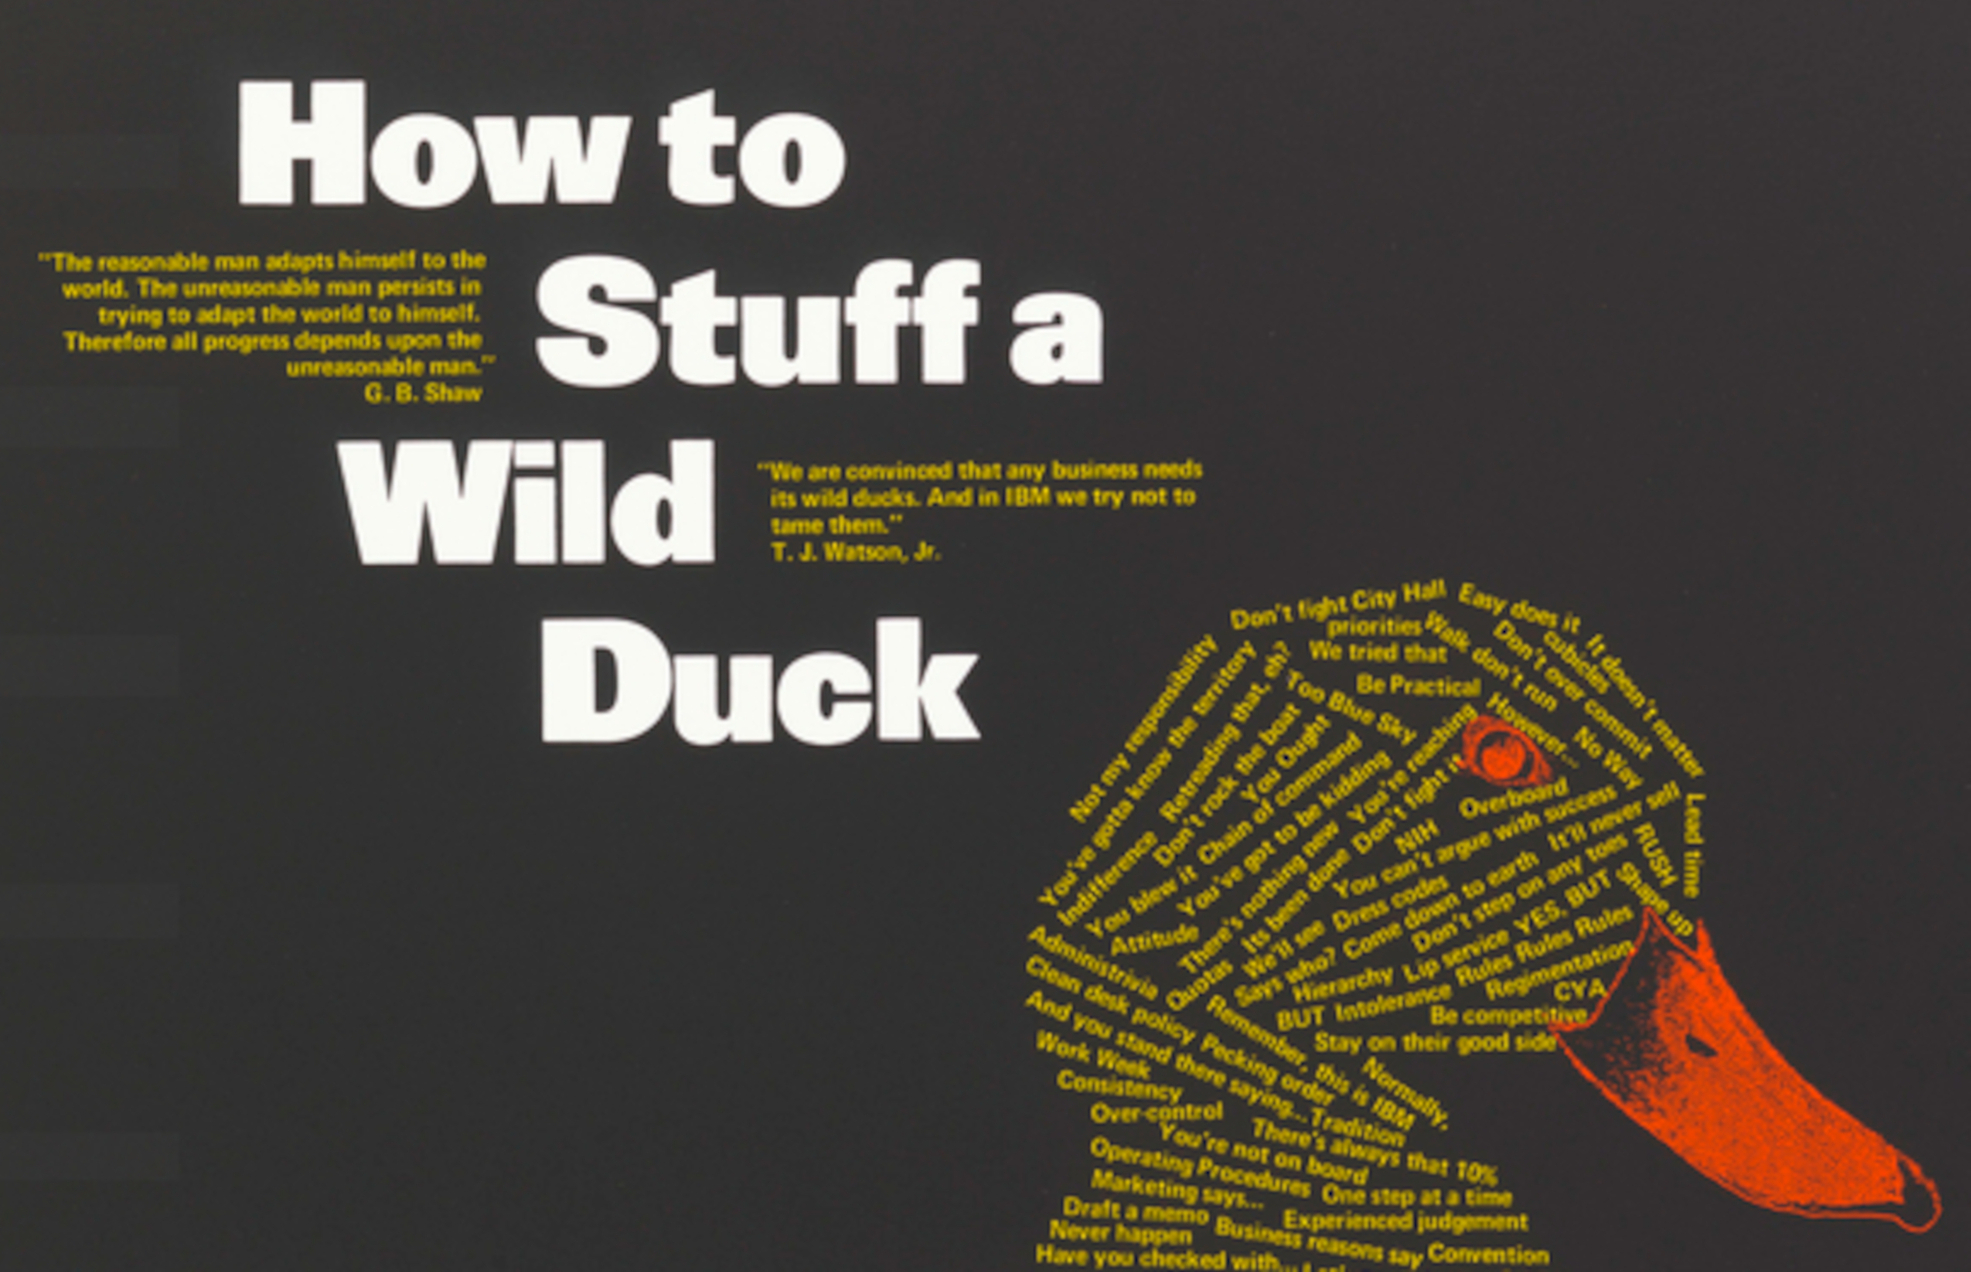 How to Stuff a Wild Duck